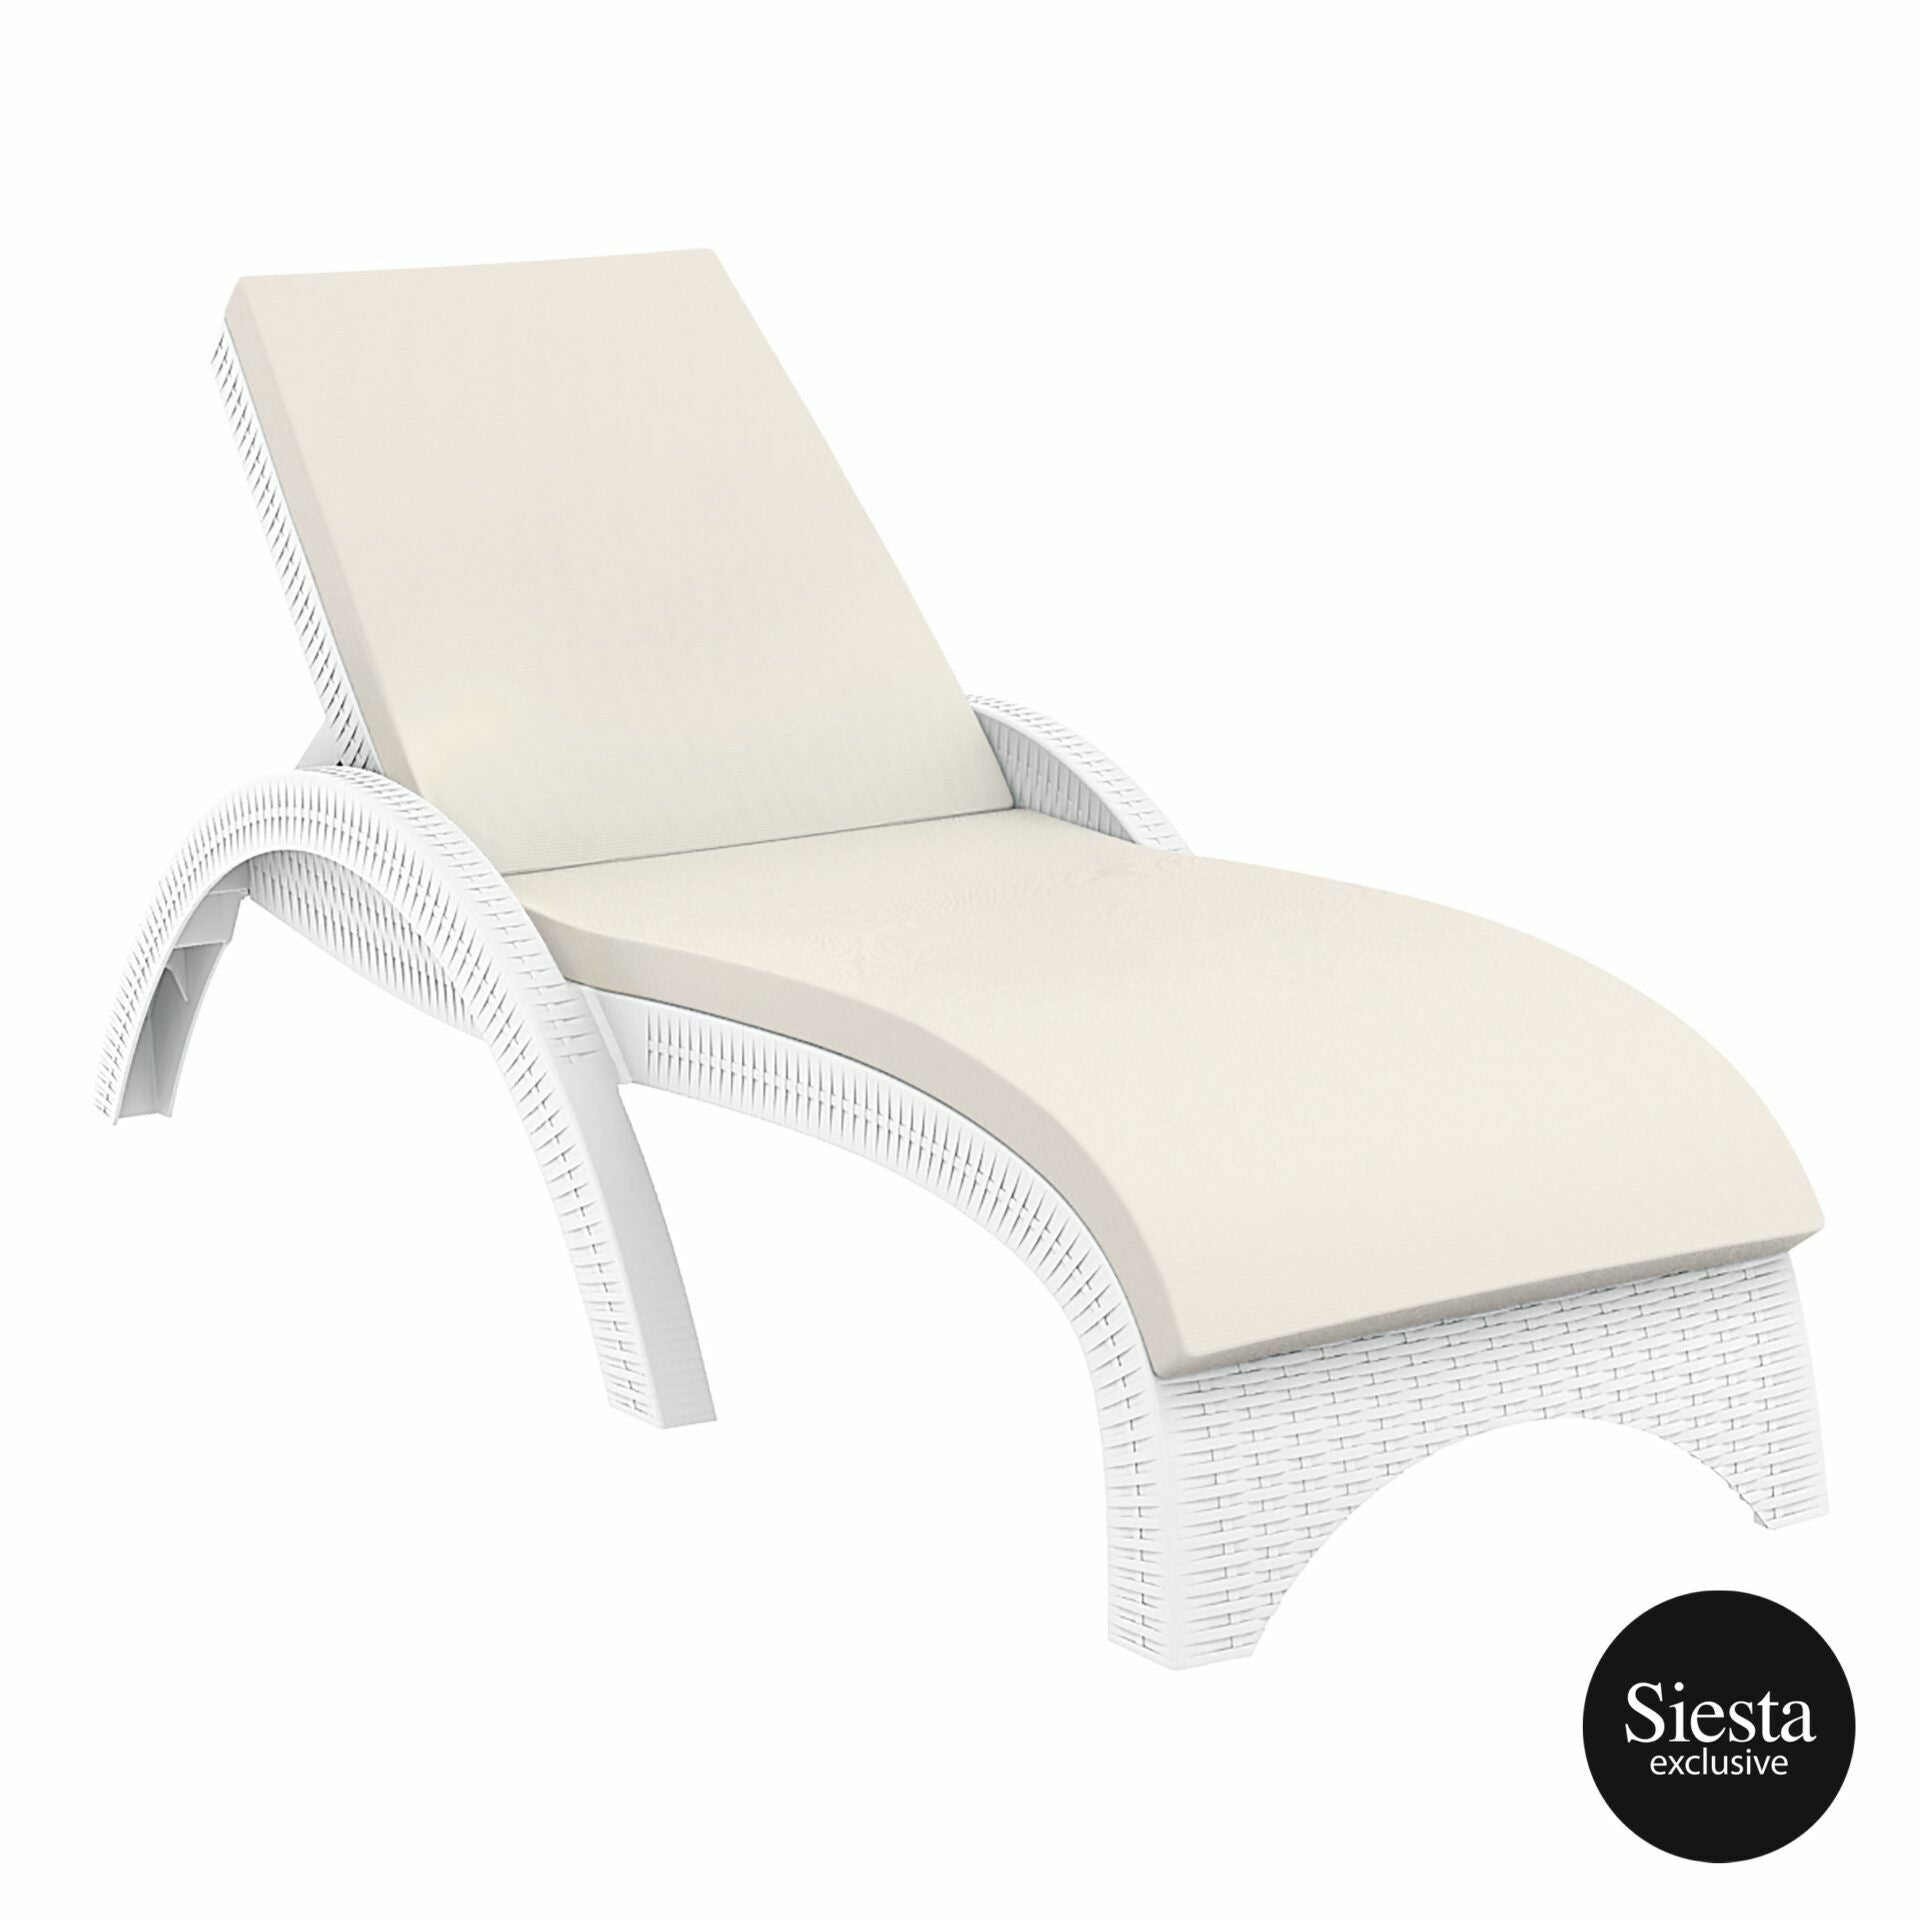 Fiji Sunlounger/Tequila Side Table 3 Pc Package - With Beige Cushion - White